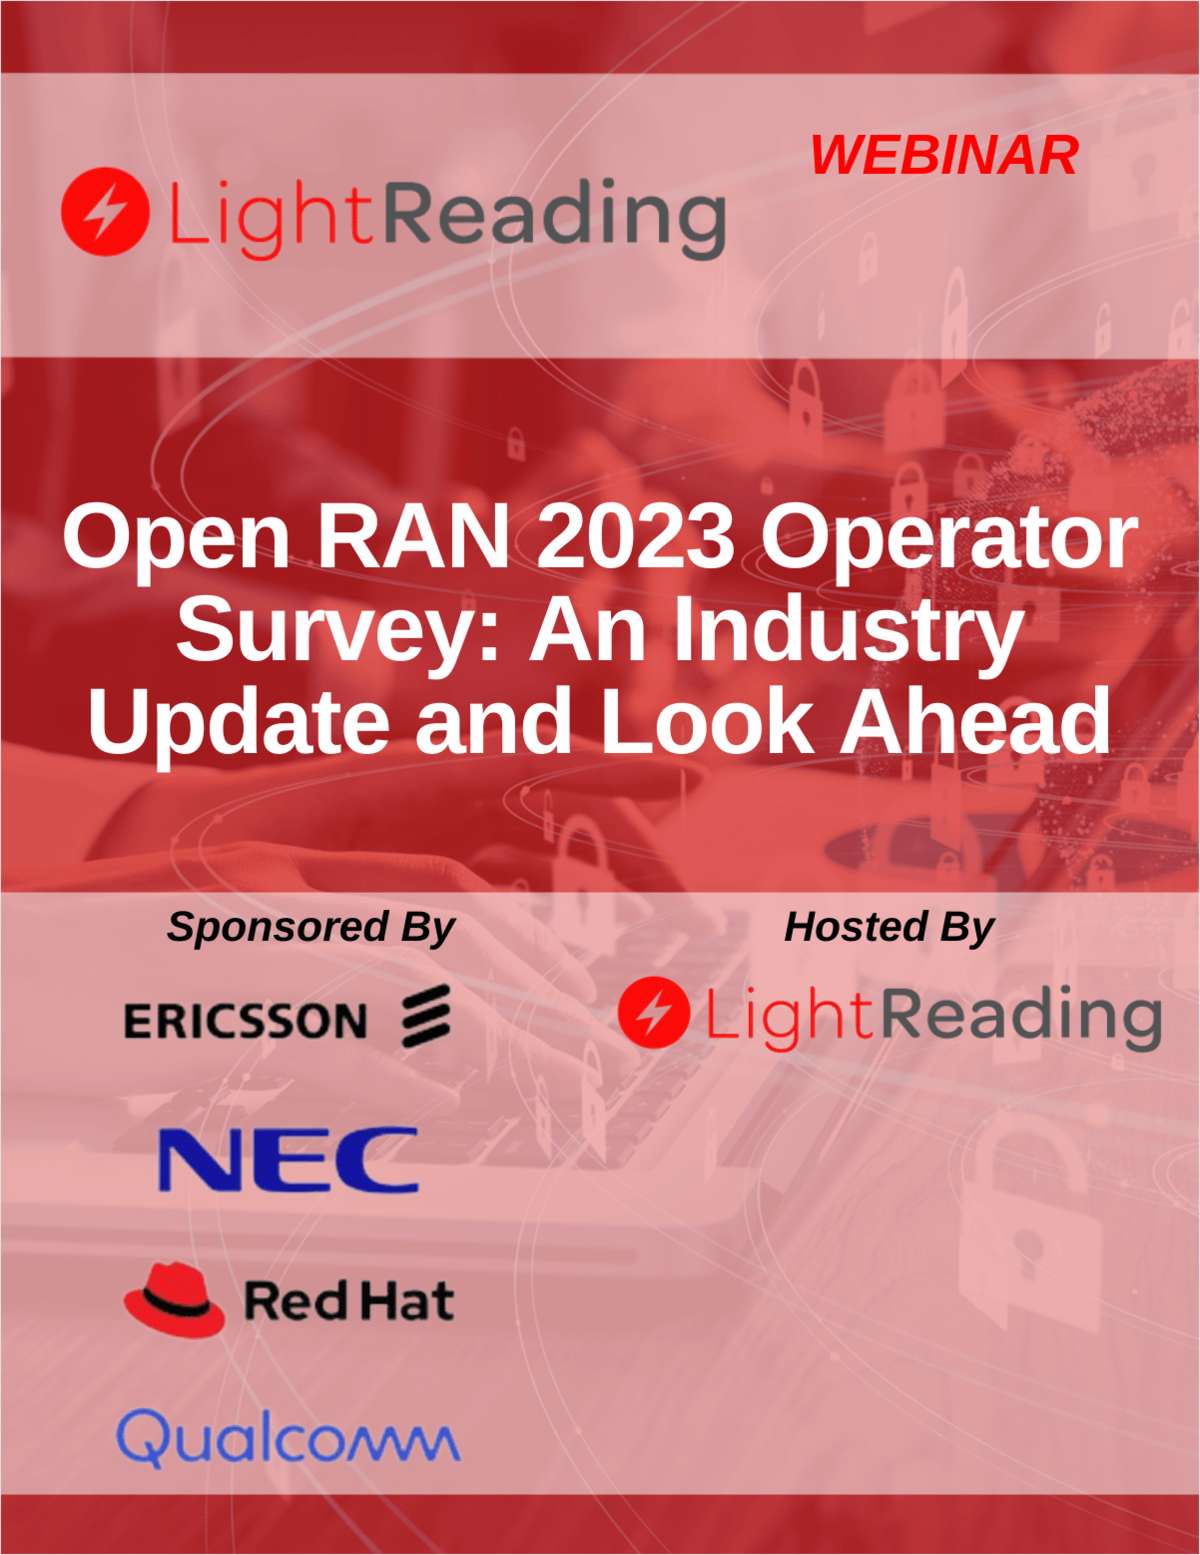 Open RAN 2023 Operator Survey: An Industry Update and Look Ahead